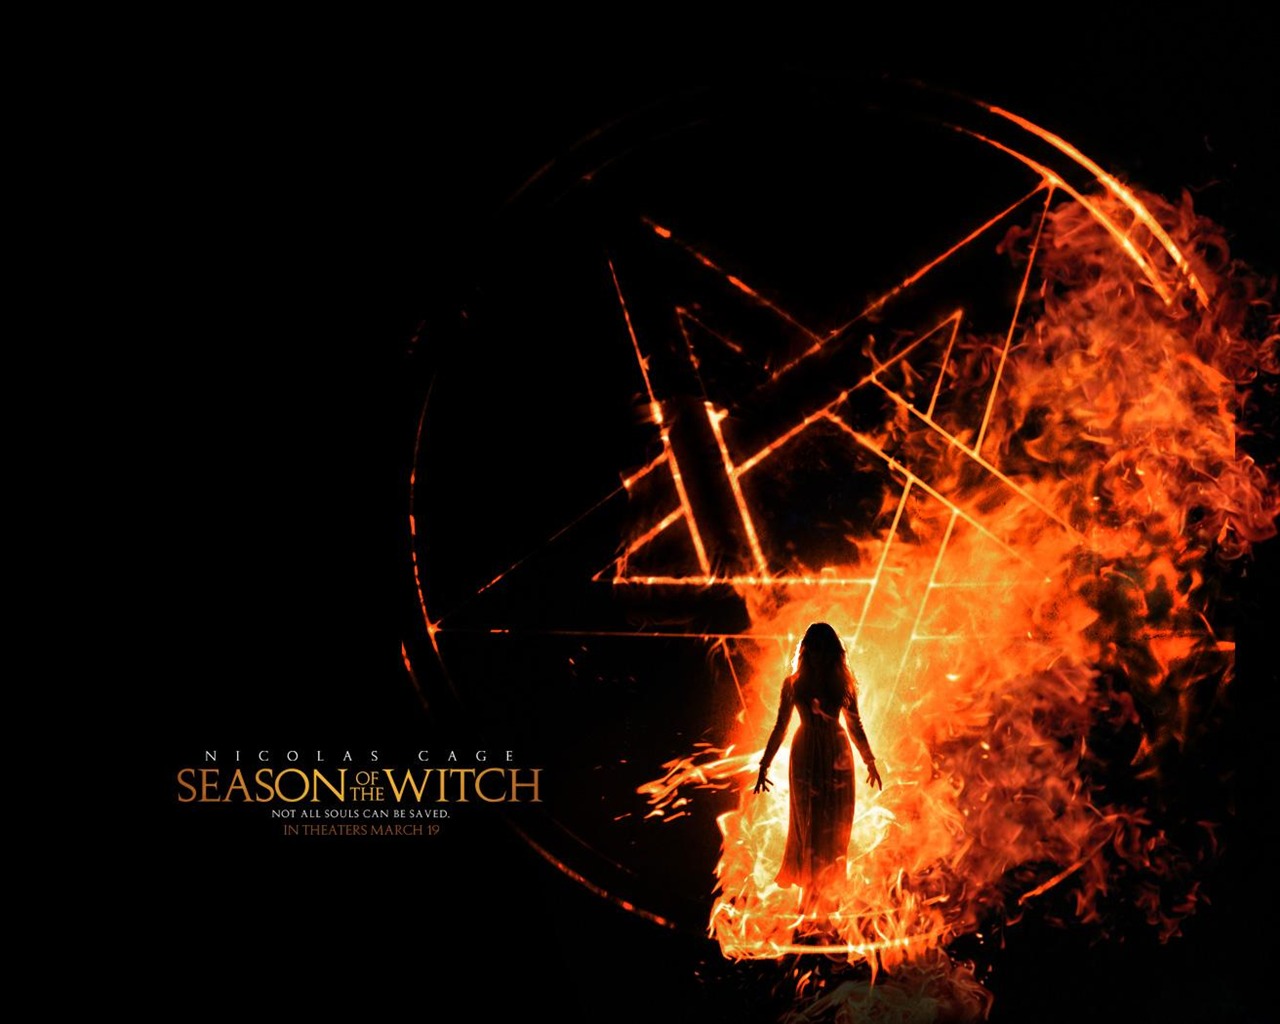 Season of the Witch wallpapers #37 - 1280x1024